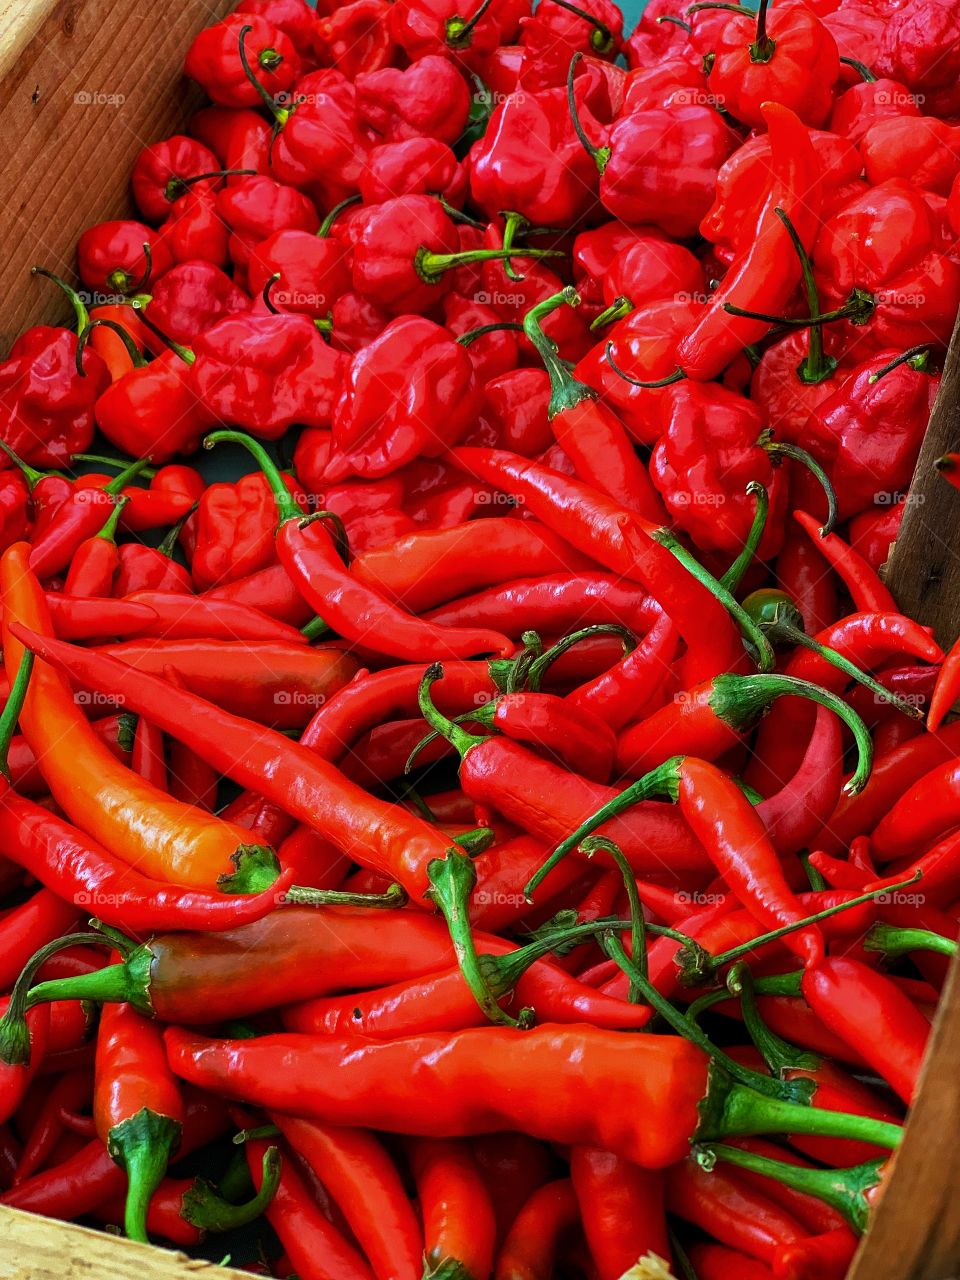 Red hot peppers. See the colors, feel the colors, taste the colors at your local Market!